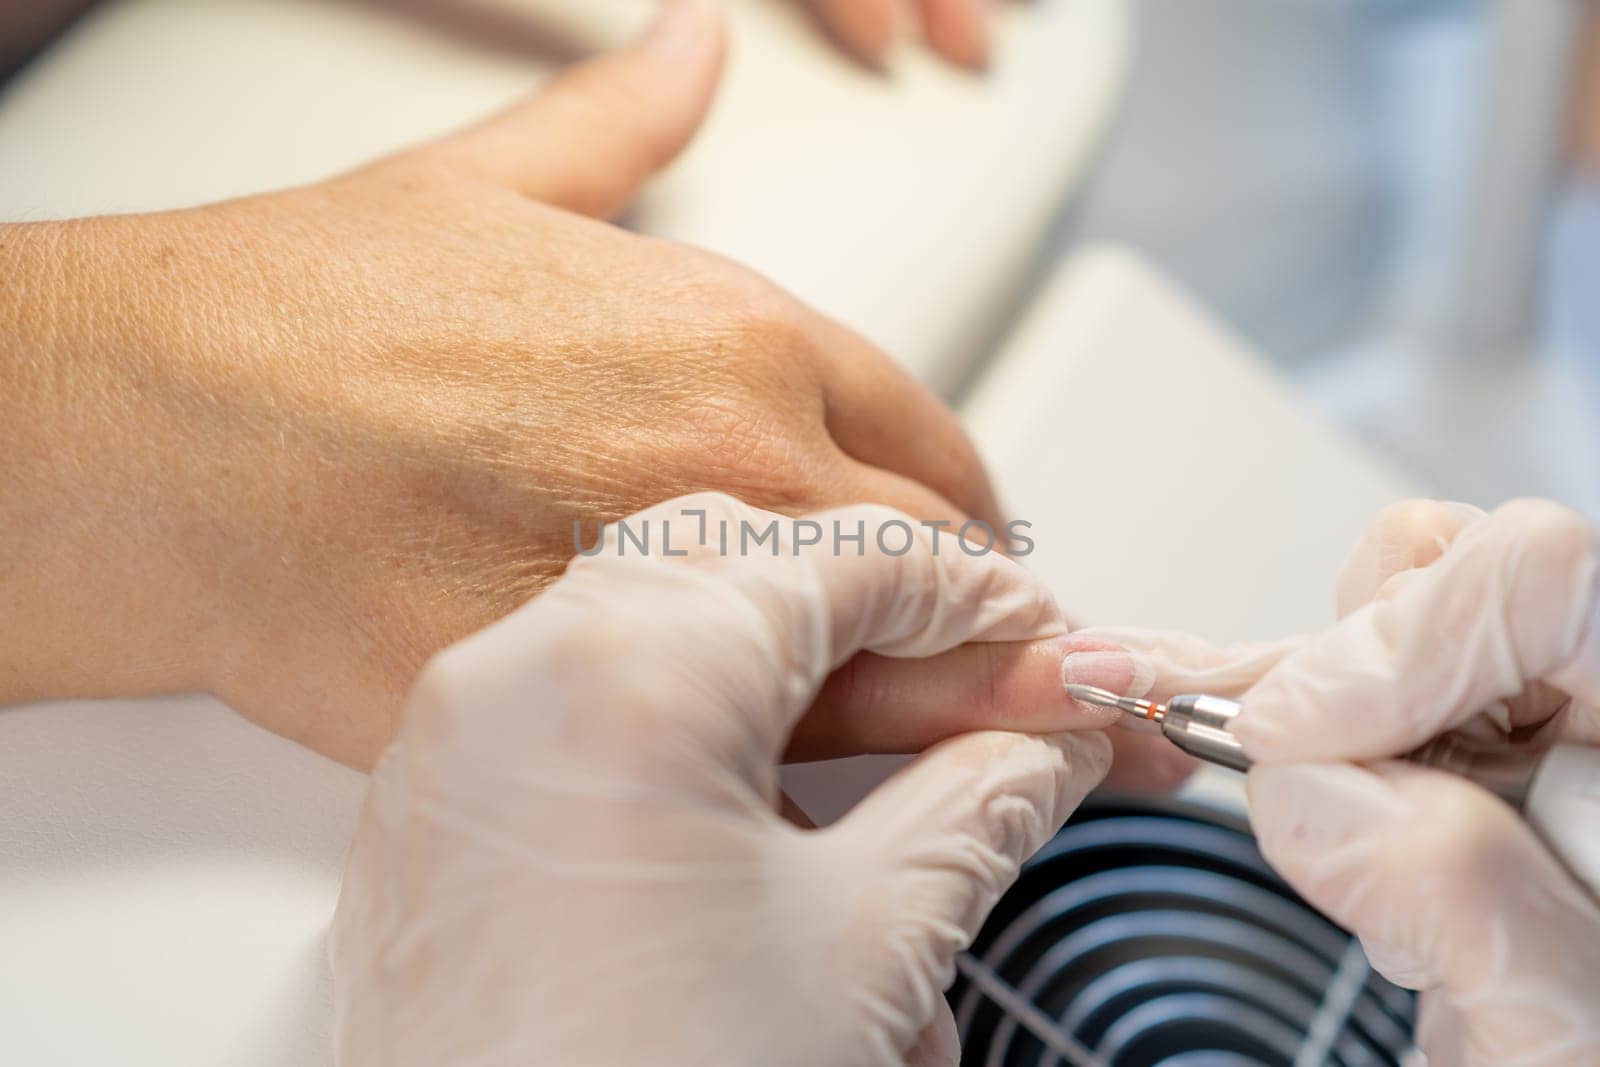 Nail care procedure in a beauty salon. Female hands and tools for manicure, process of performing manicure in beauty salon. Gloved hands of a skilled manicurist cutting cuticles. Concept spa body care